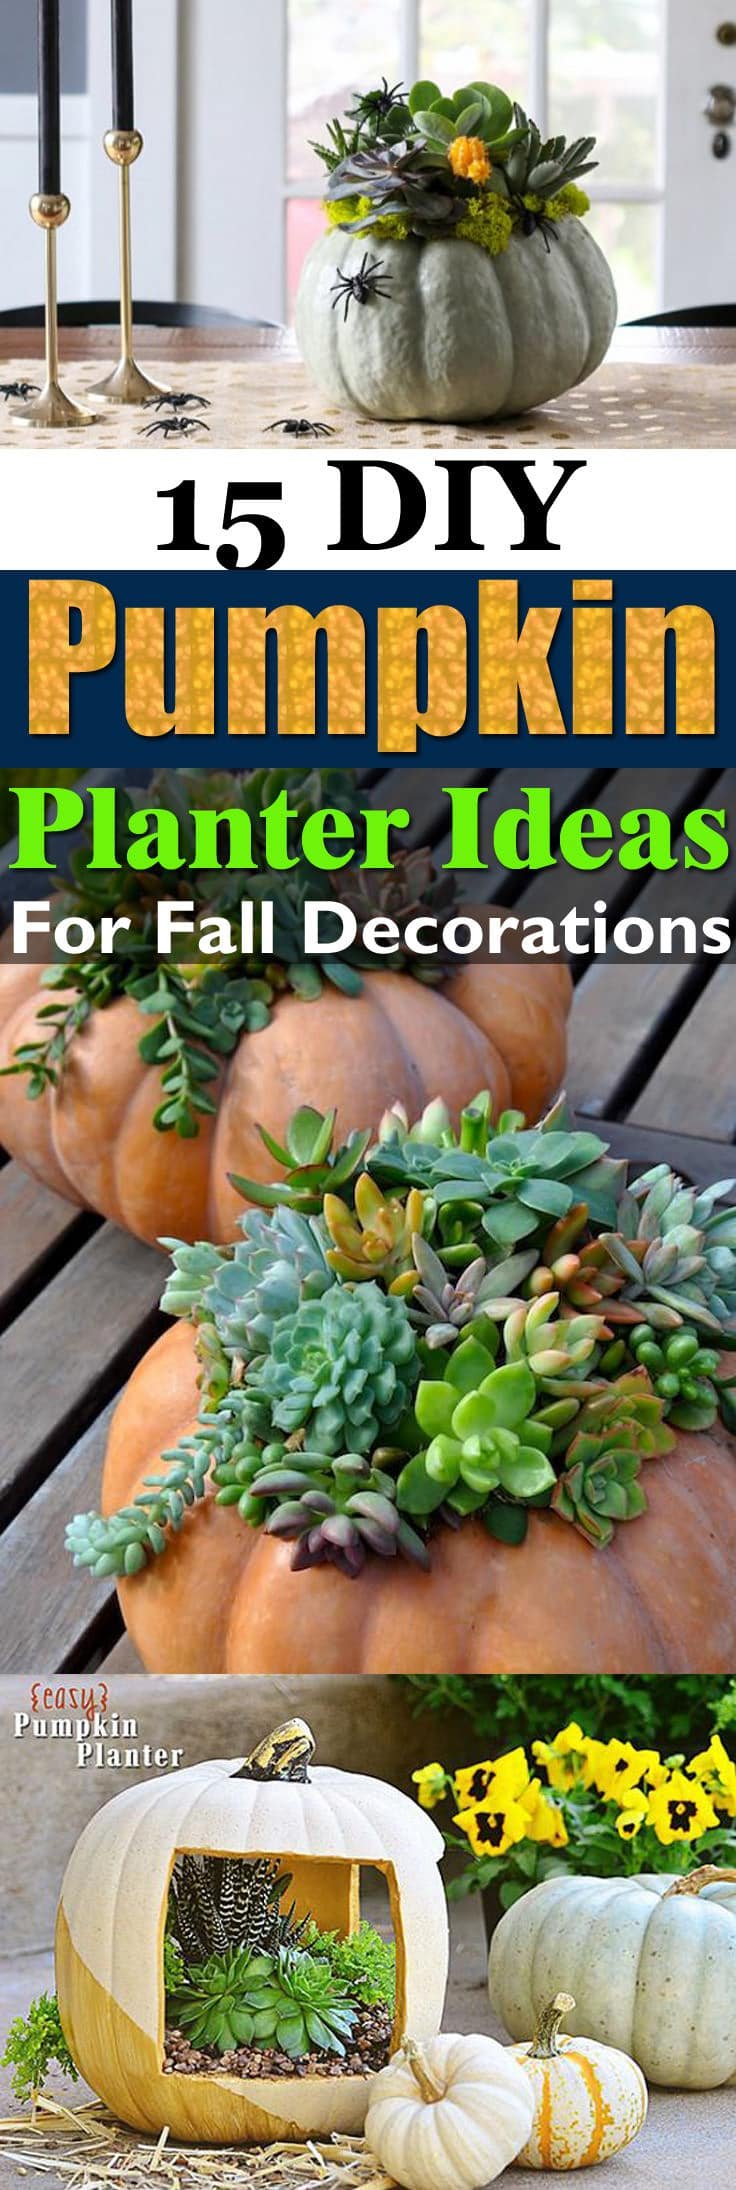 Carve pumpkins or else use the plastic ones for these 15 amazing DIY pumpkin planter ideas for fall decorations!